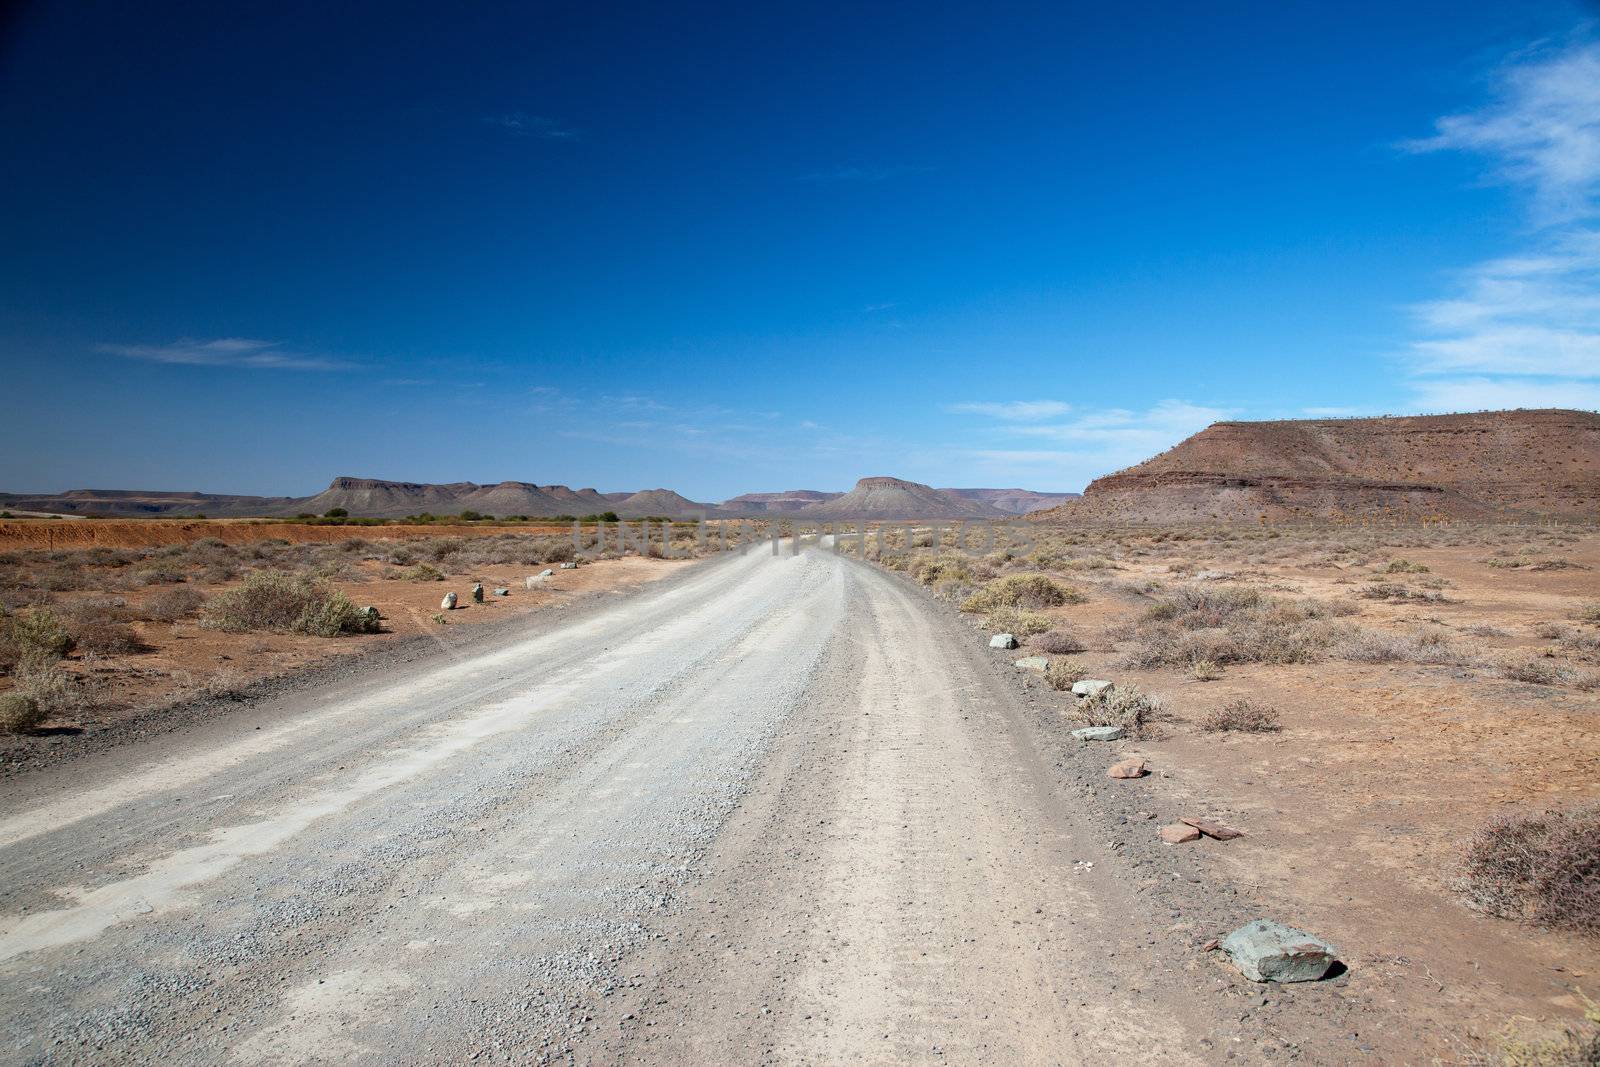 Dry landscape in South Africa with a lonely road or highway with a vision and a clear blue sky - horizontal